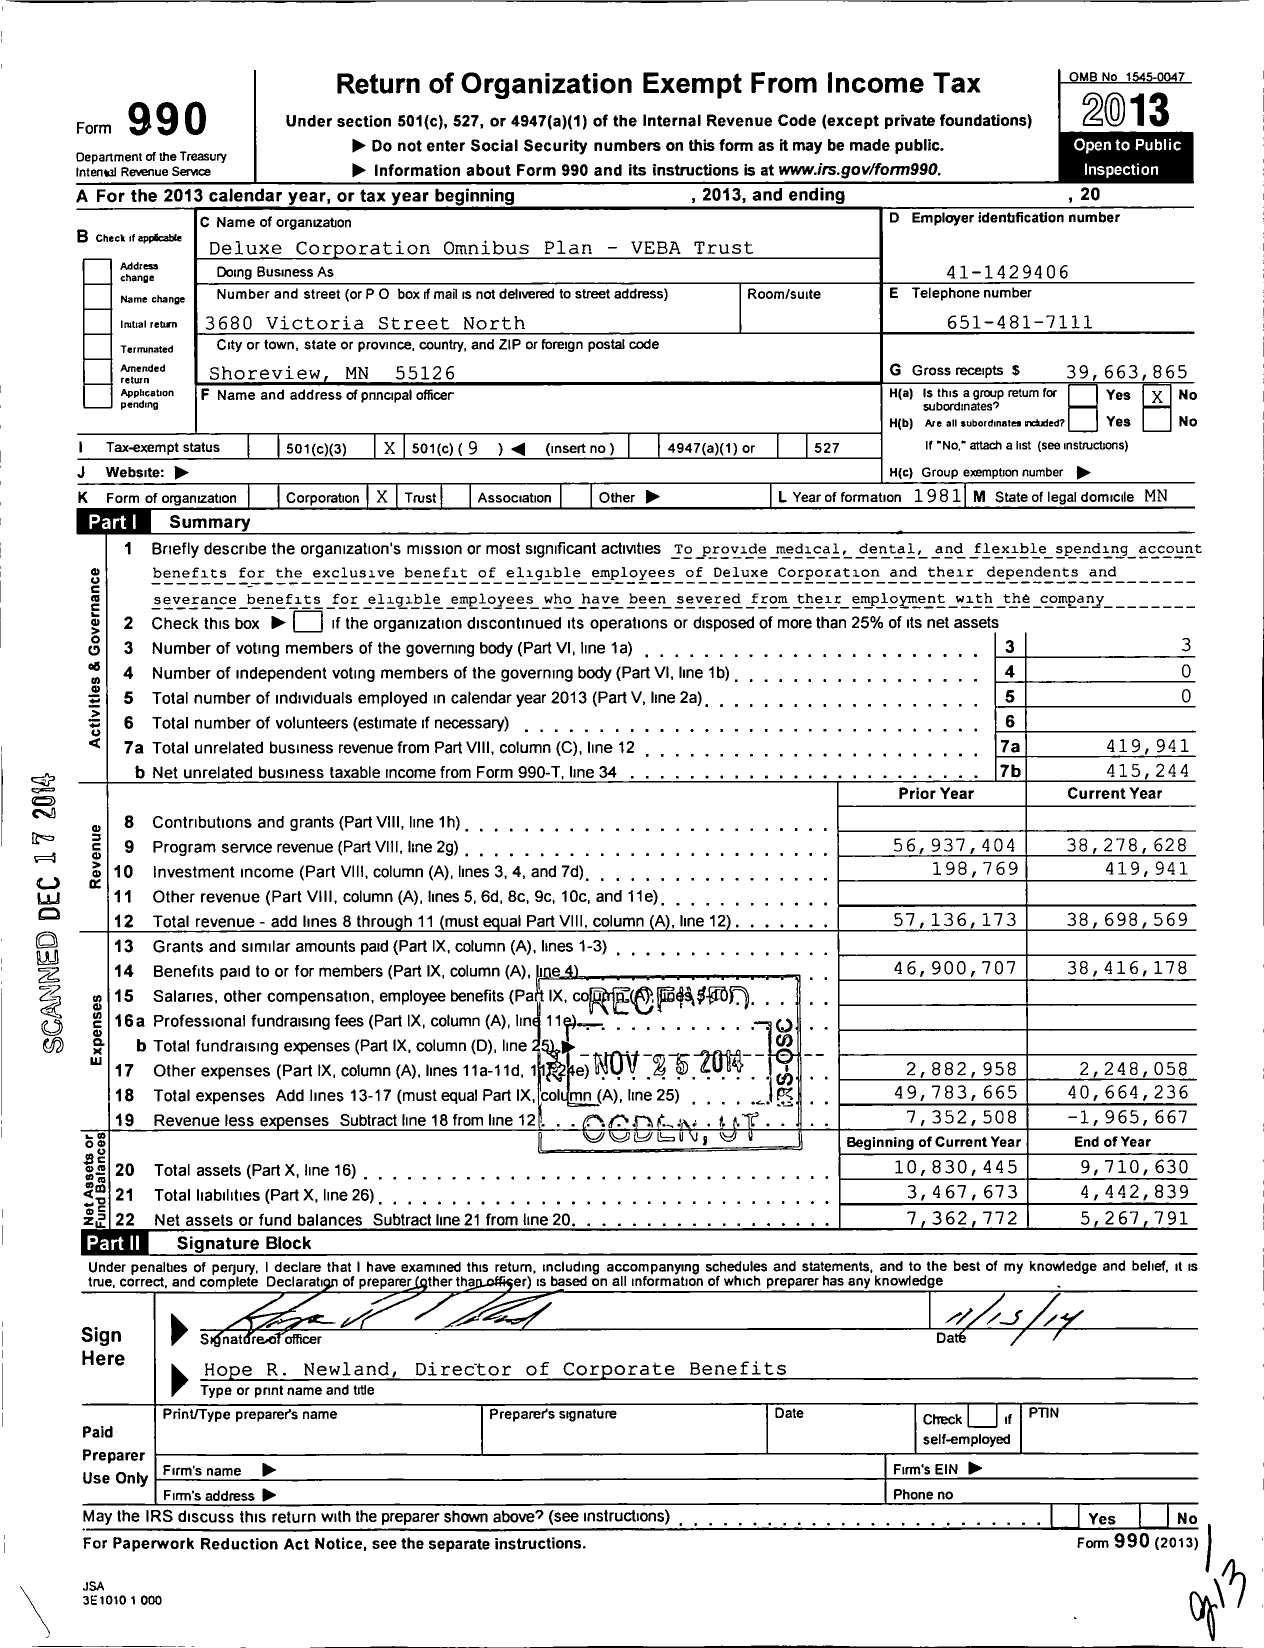 Image of first page of 2013 Form 990O for Deluxe Corporation Omnibus Plan